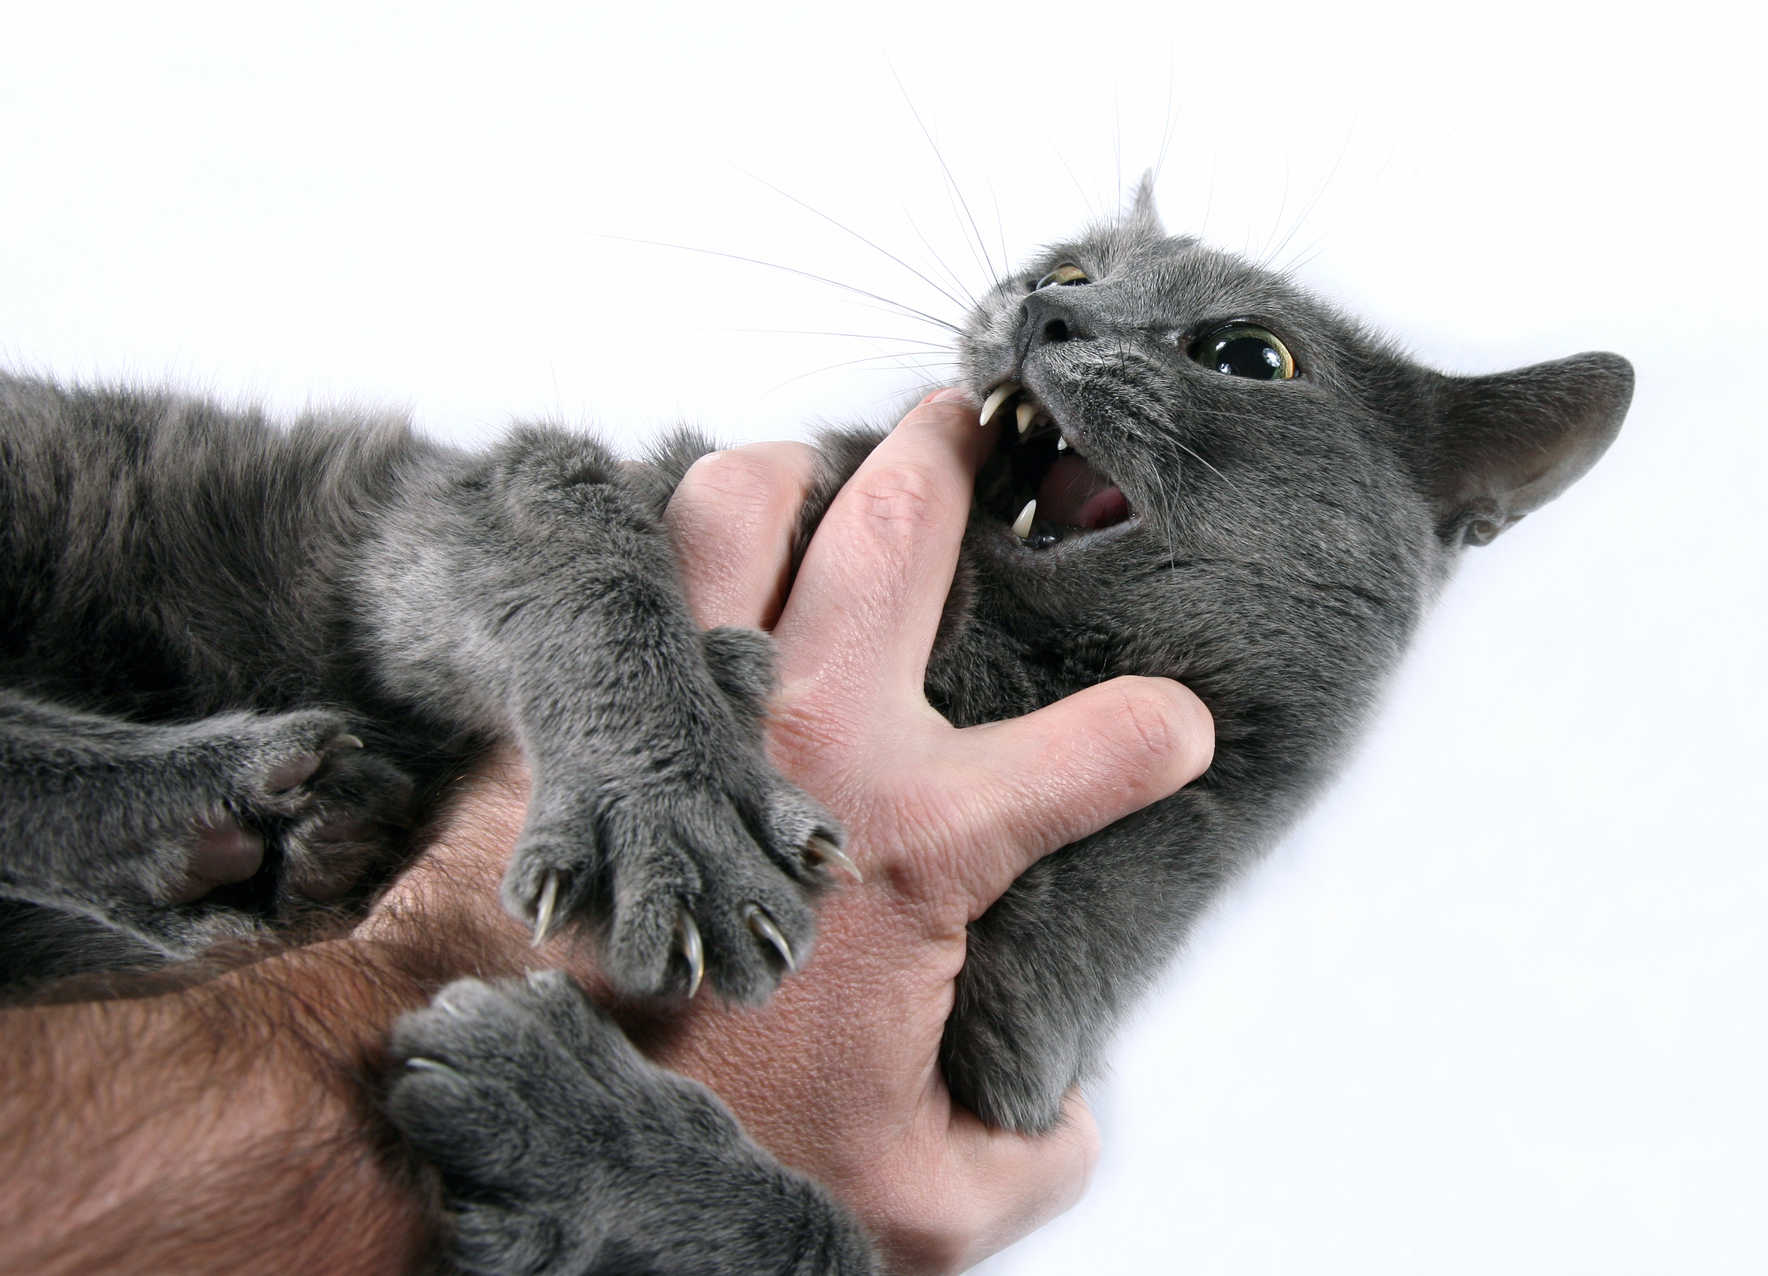 cat biting owner's hand after petting